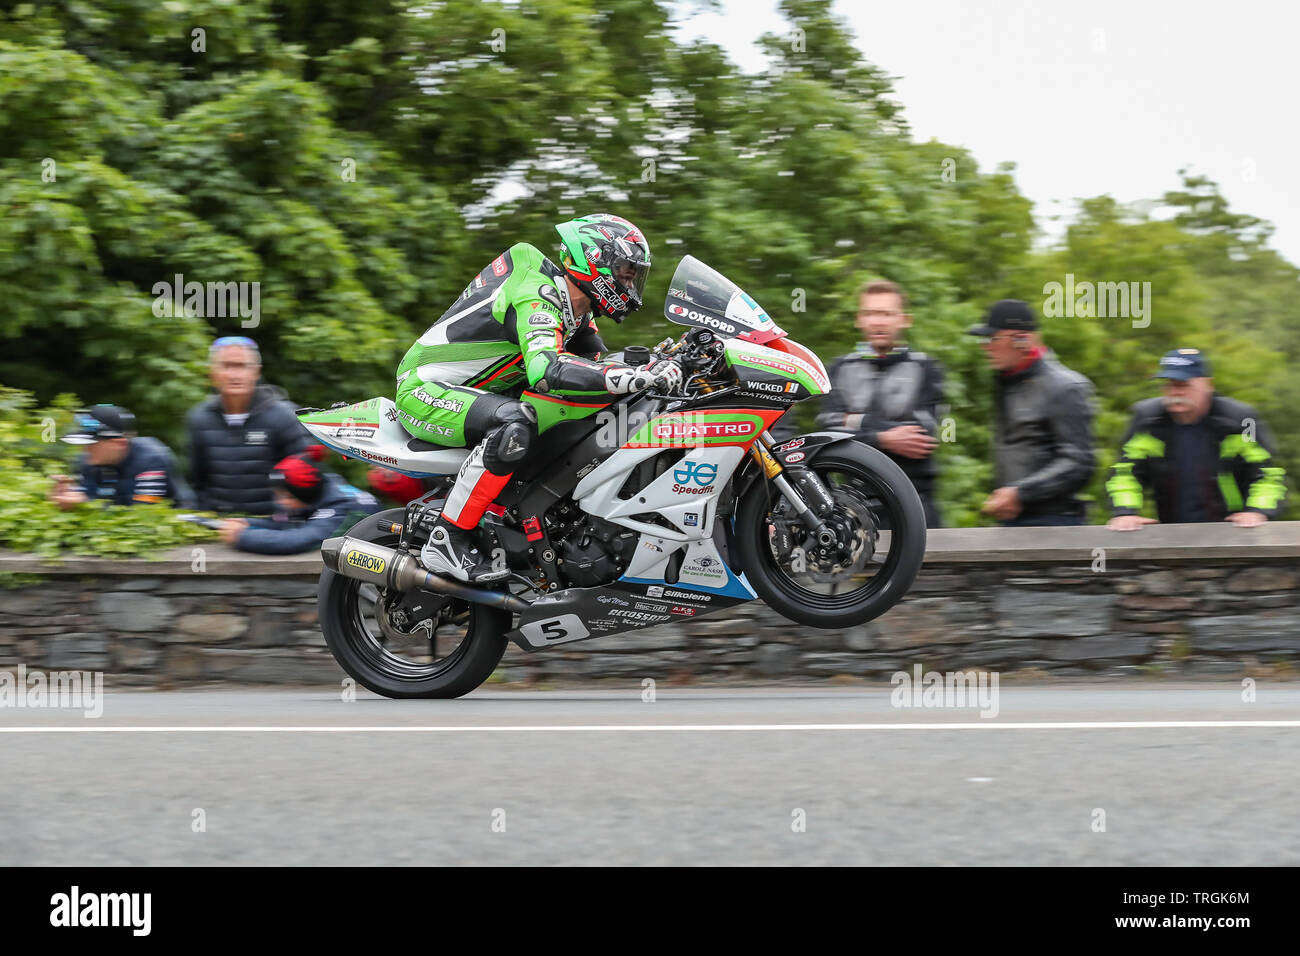 James Hillier (5)  - Quattro Plant Wicked Coatings Kawasaki Kawasaki in action on his way to securing second place in the Monster Energy Supersport TT Stock Photo